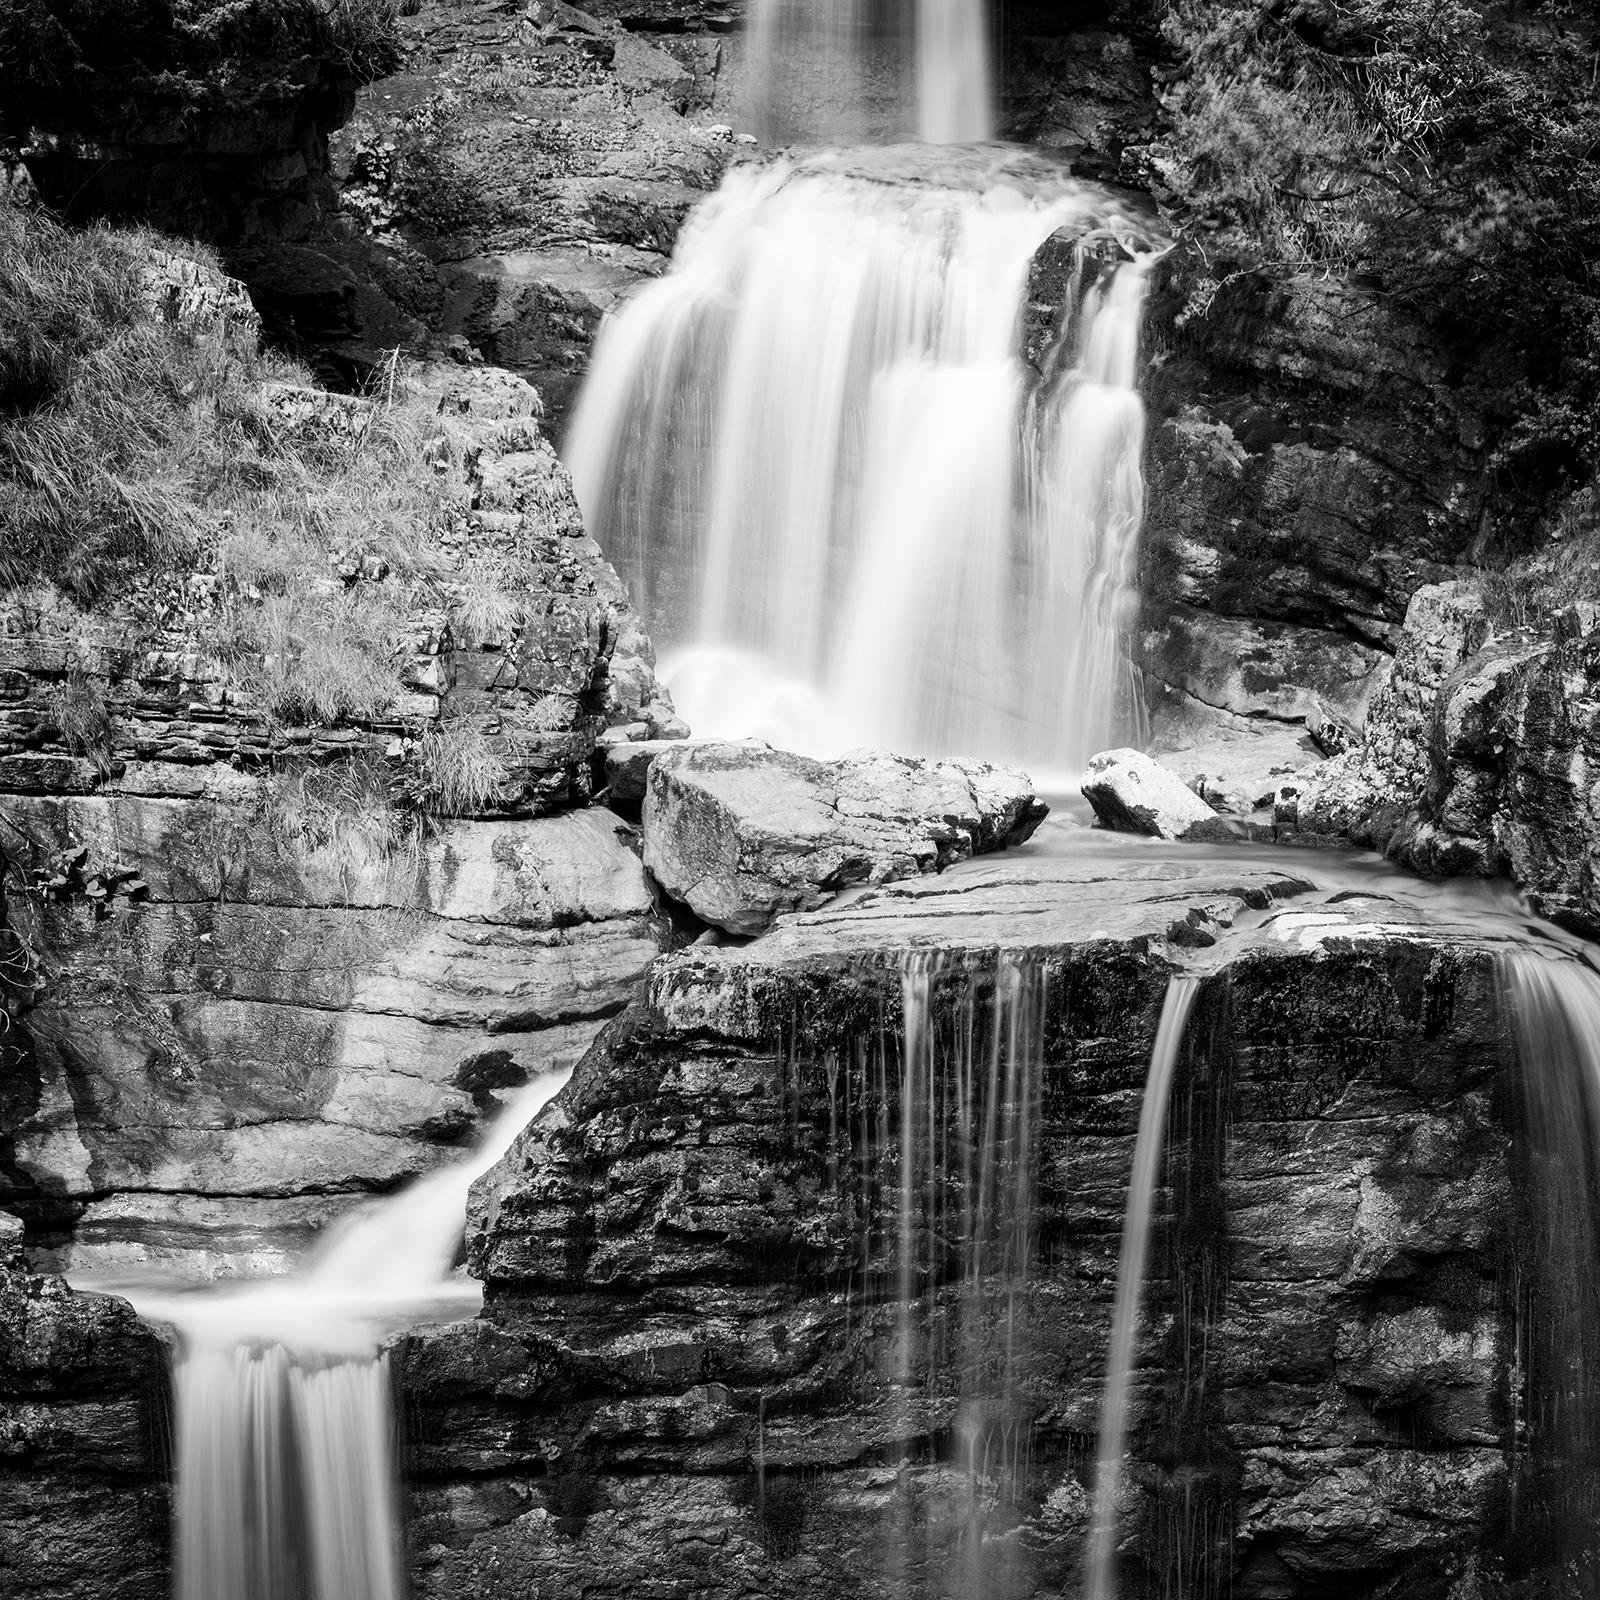 Kuhflucht, lower Waterfall, Germany, black and white art landscape photography For Sale 4